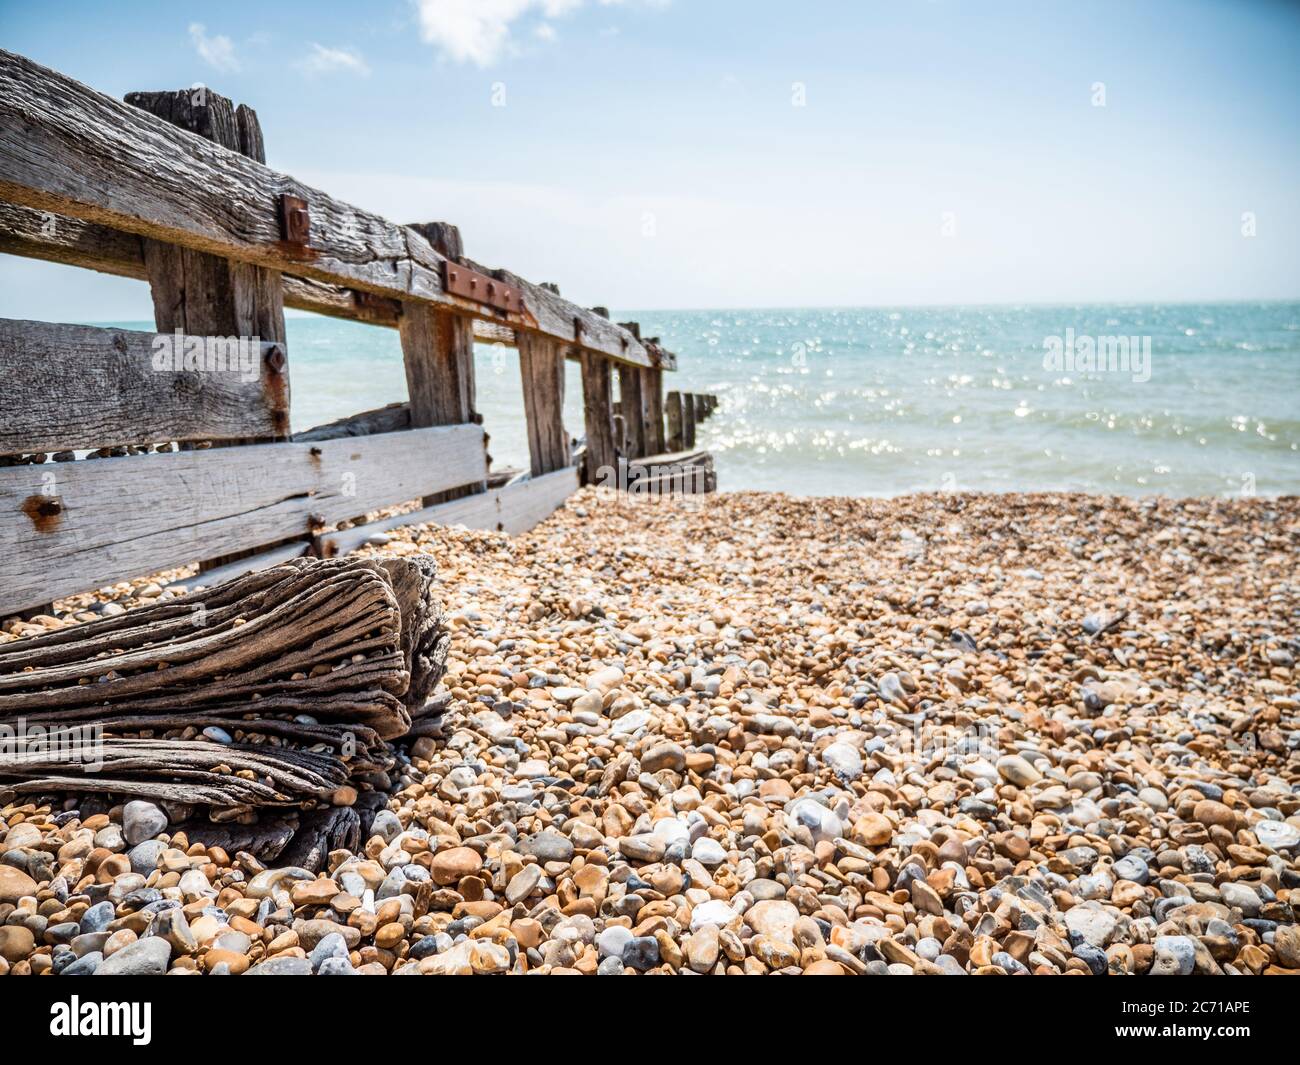 Wave breaker, Sussex, England. An old wavebreaker on a pebbled beach leading into the sea on the south coast of England. Stock Photo